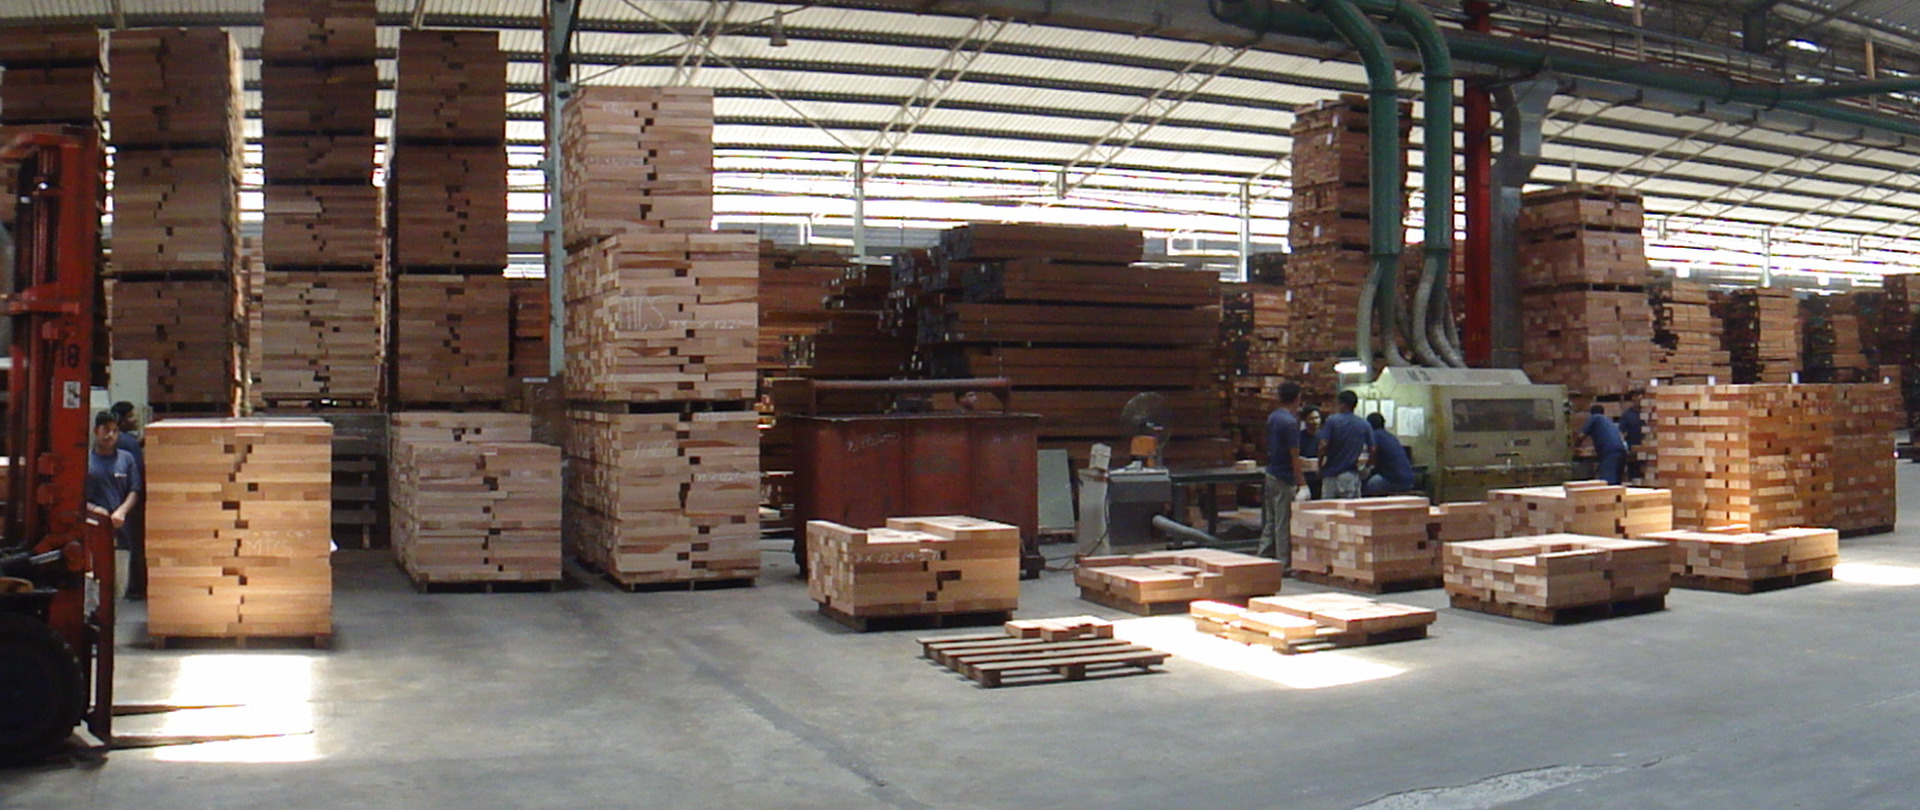 International Leading Supplier of Wood Based and Engineered Products